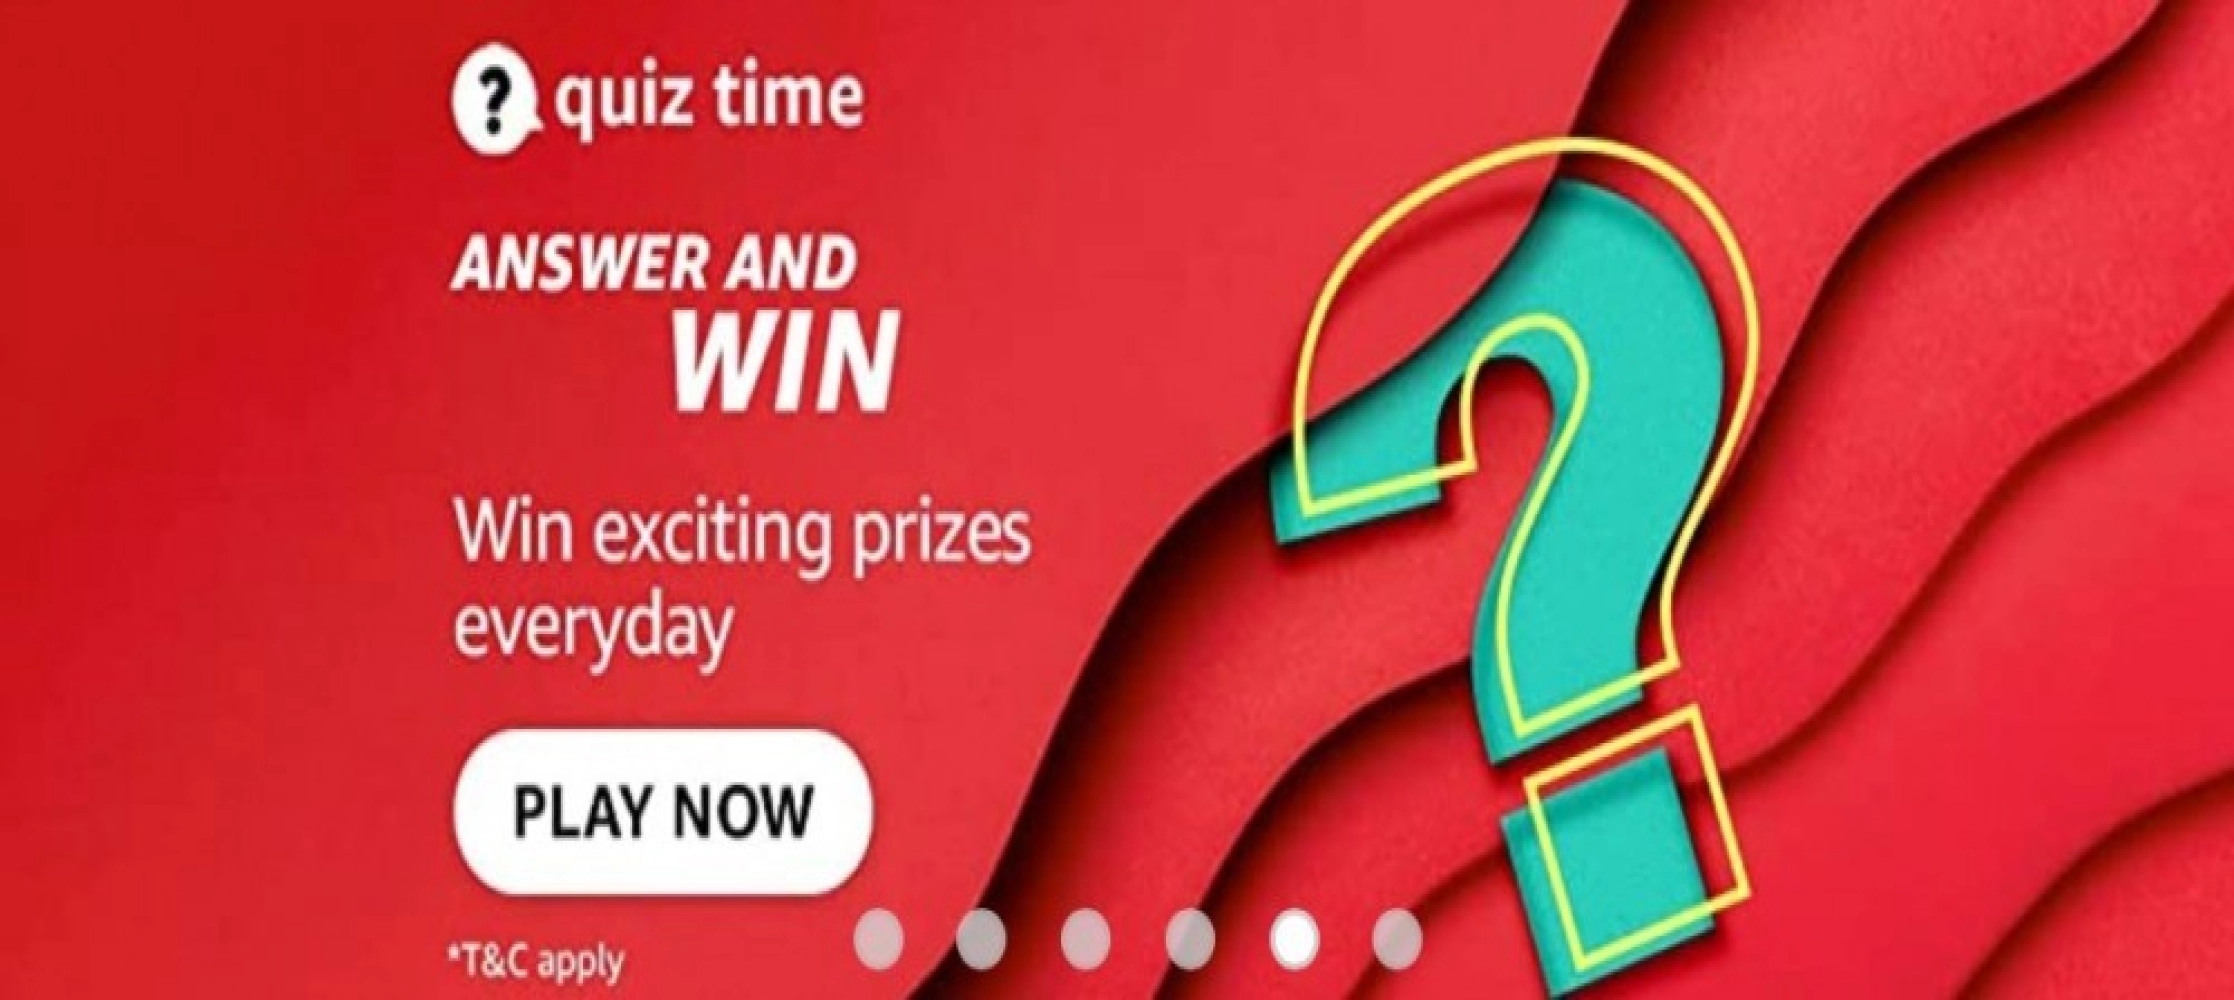 AMAZON QUIZ CONTEST: 7 MAY, 2022 - ANSWER TODAY FOR THE QUESTIONS AND GET A CHANCE TO WIN AMAZON PAY RS.30,000